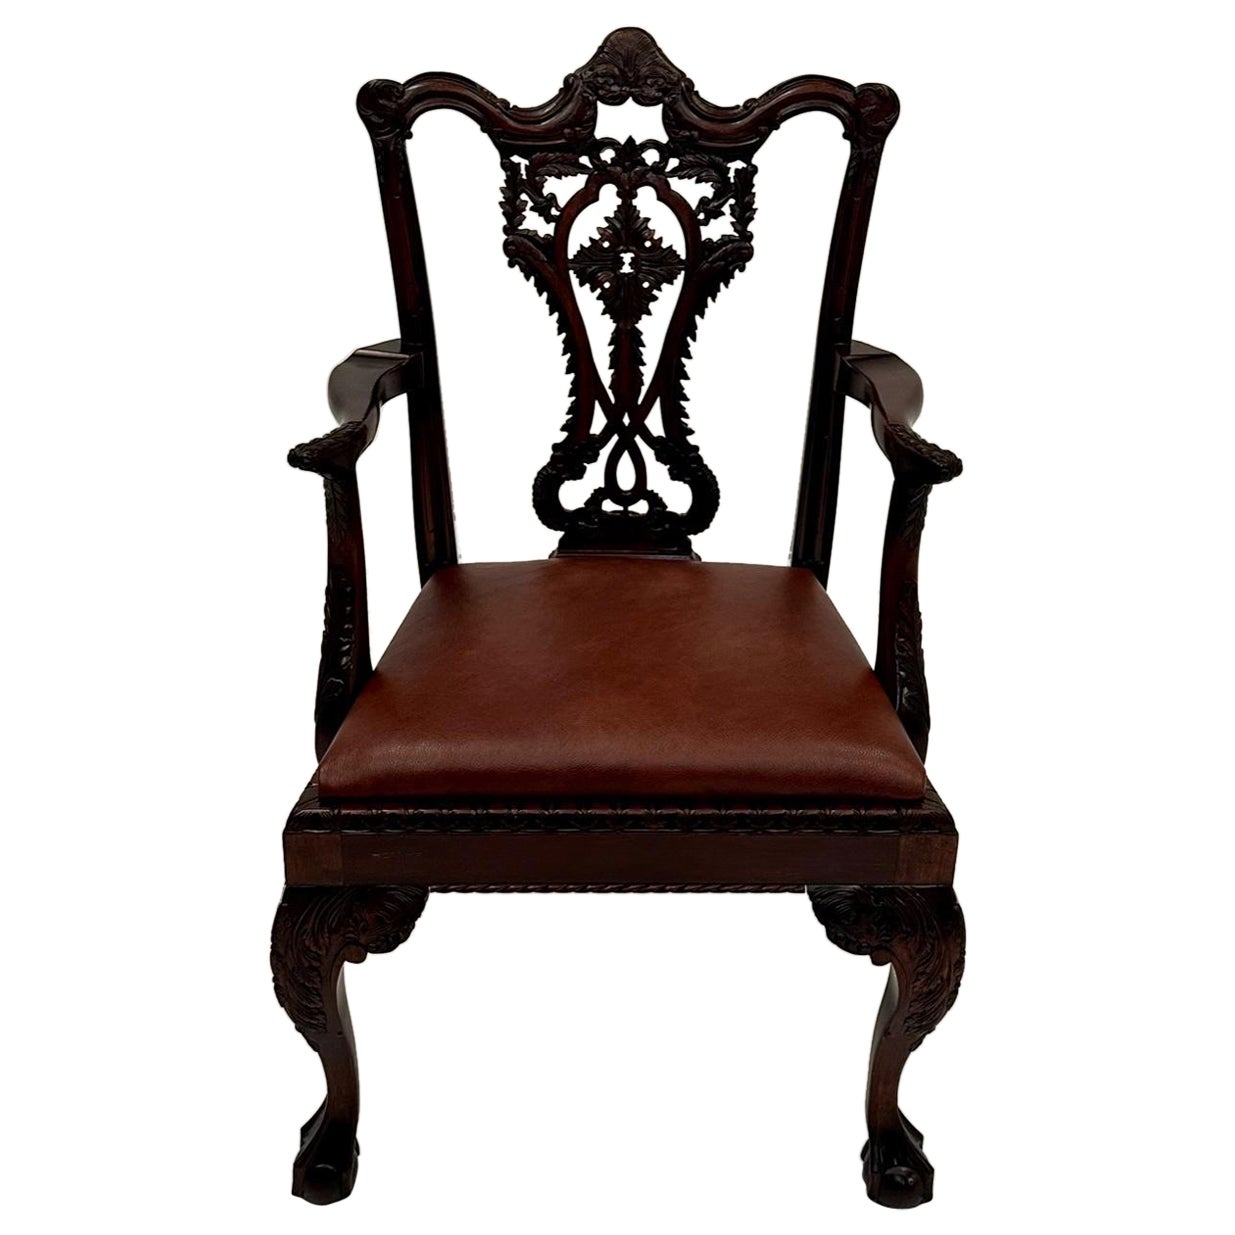 Especially Handsome Hand Carved Mahogany English Chippendale Style Armchair